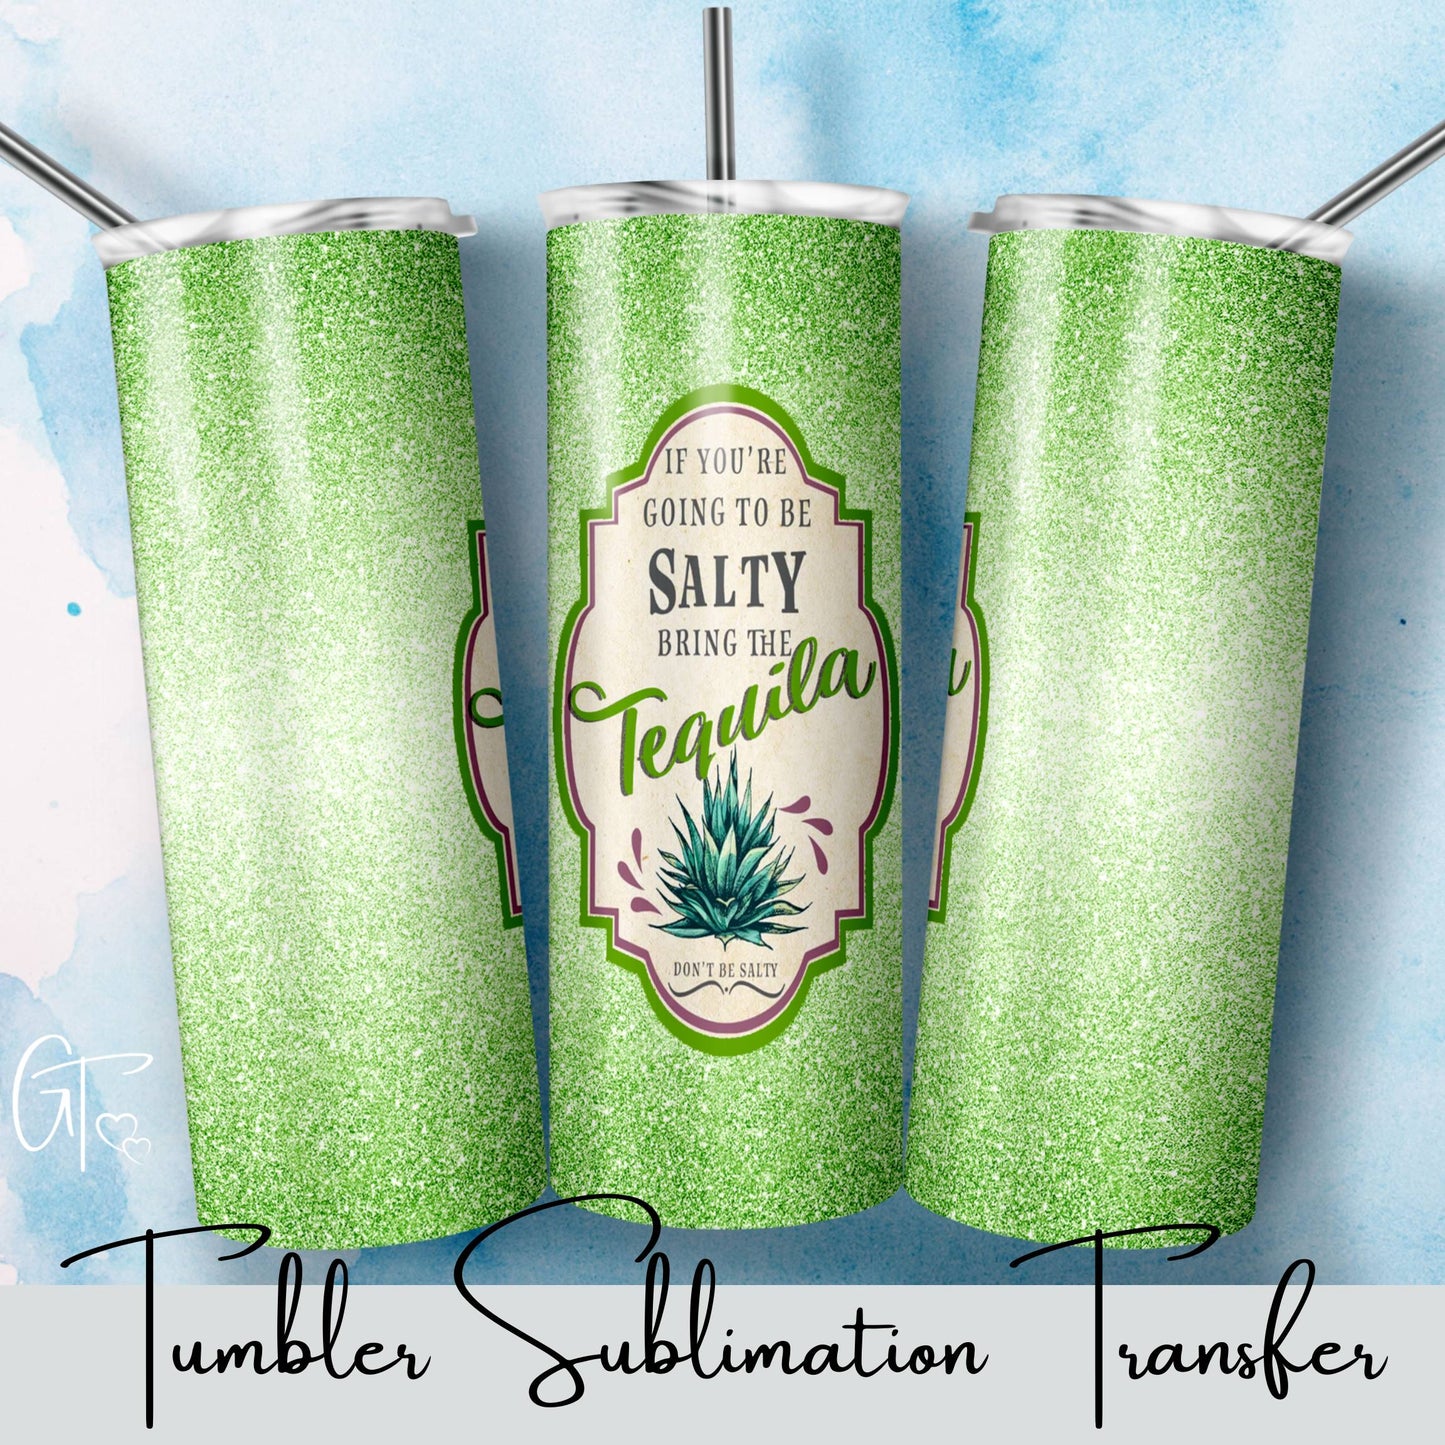 SUB1561 If you're going to be Salty Bring the Tequila Tumbler Sublimation Transfer